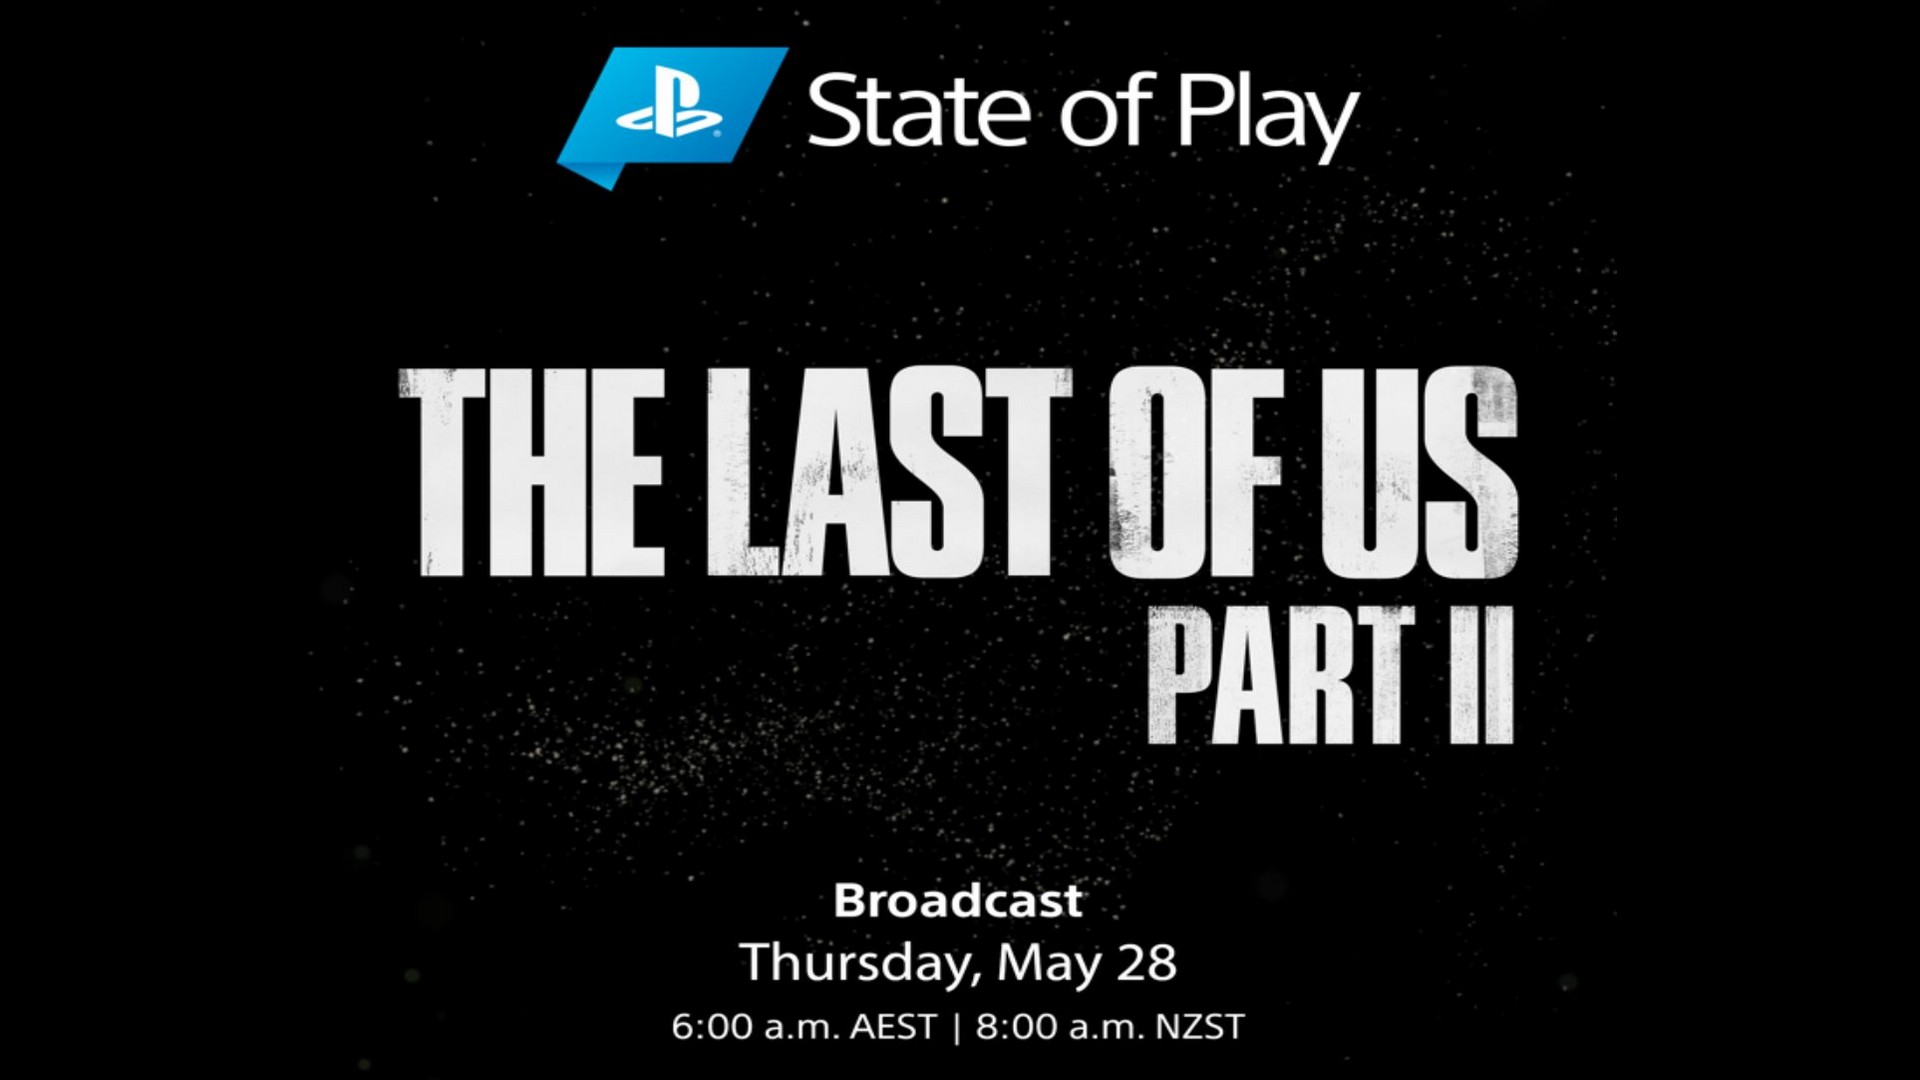 State of Play: Get a Preview Of The Last of Us Part II This Thursday